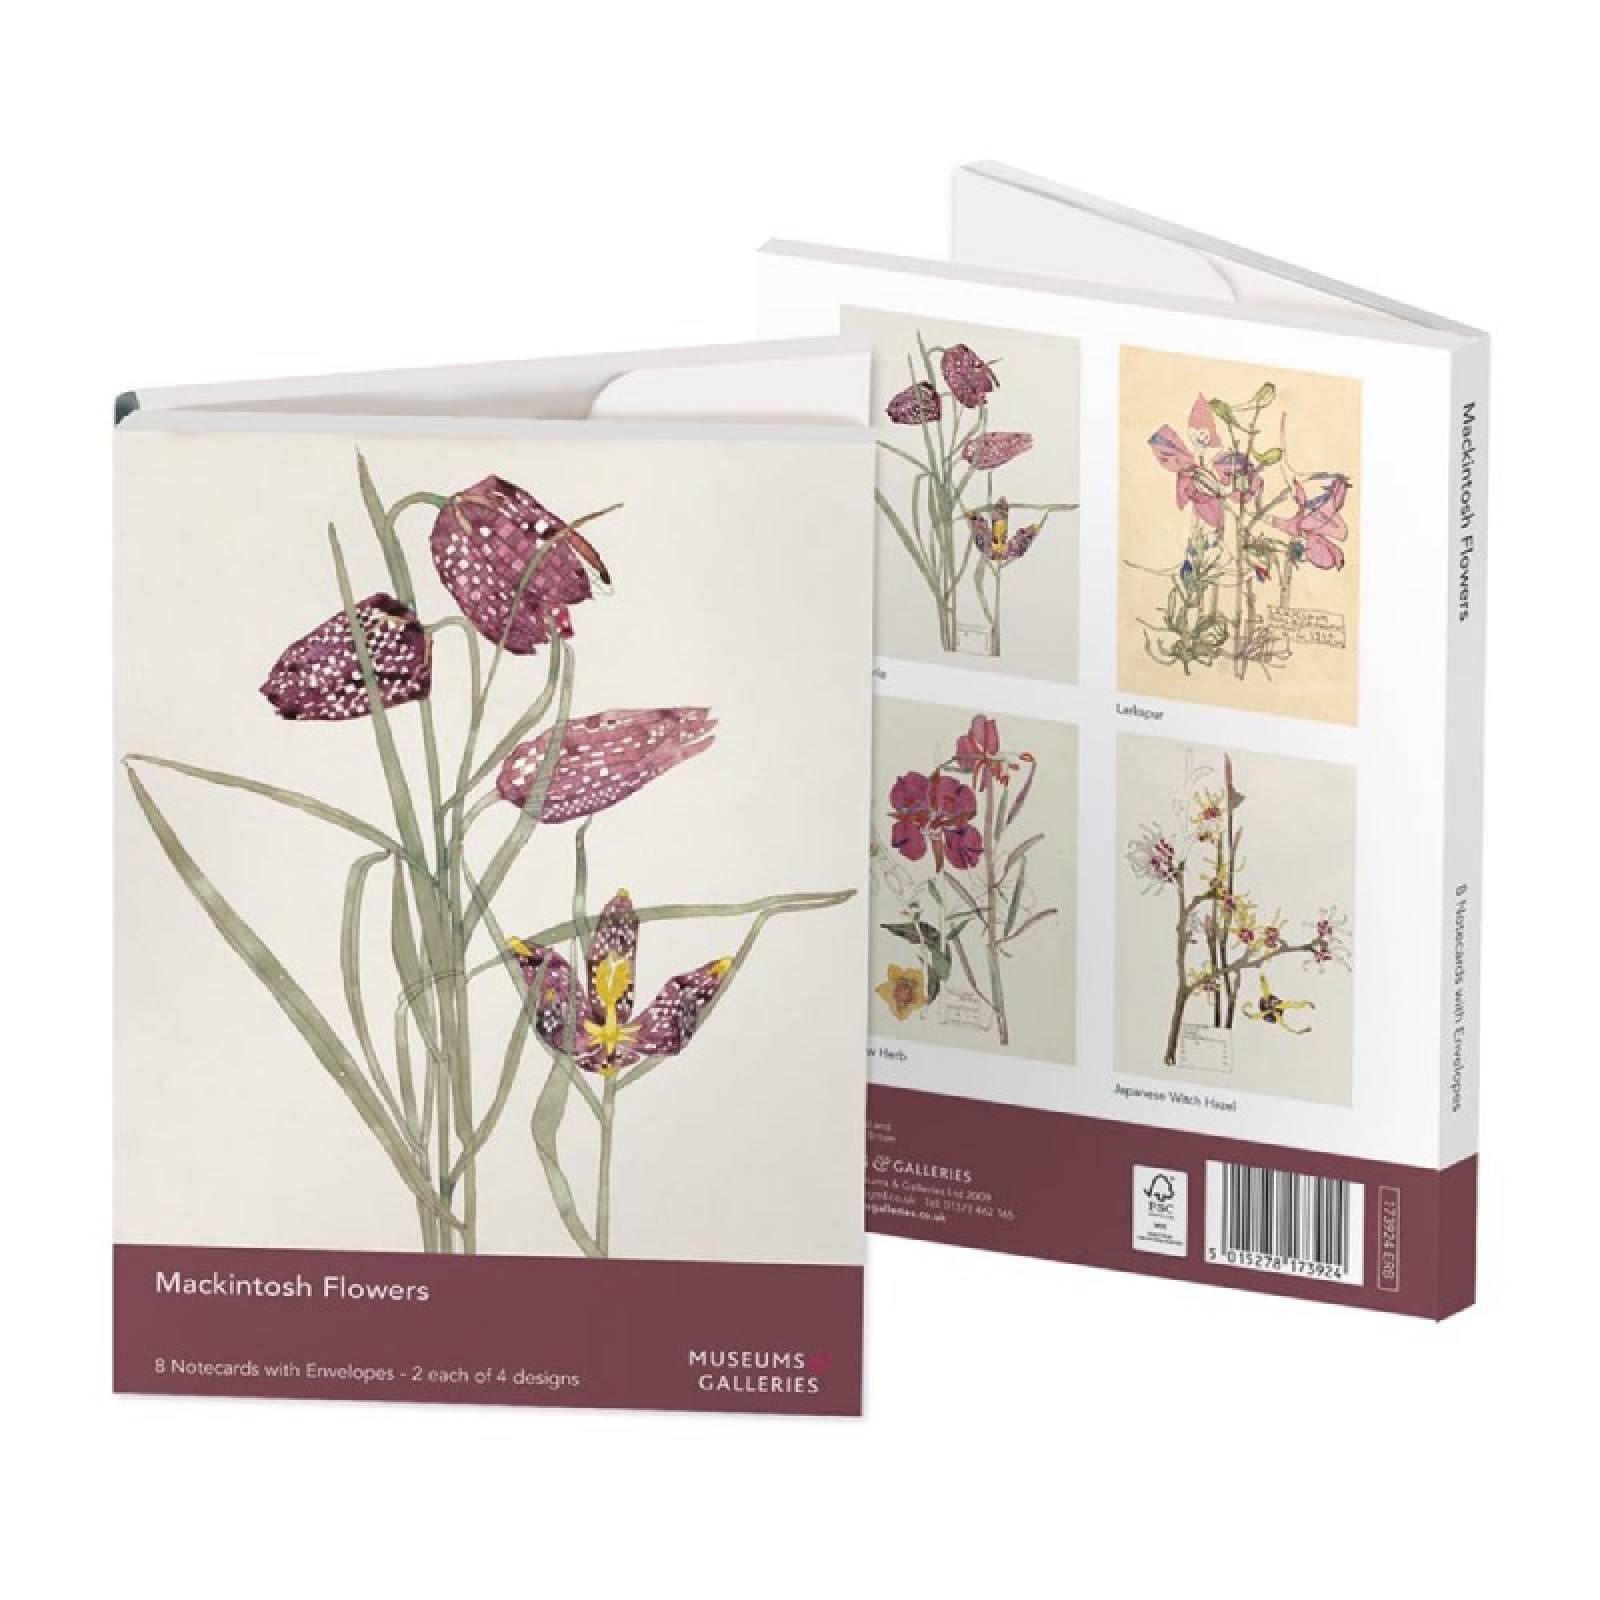 Mackintosh Flowers - Pack Of 8 Notecards And Envelopes